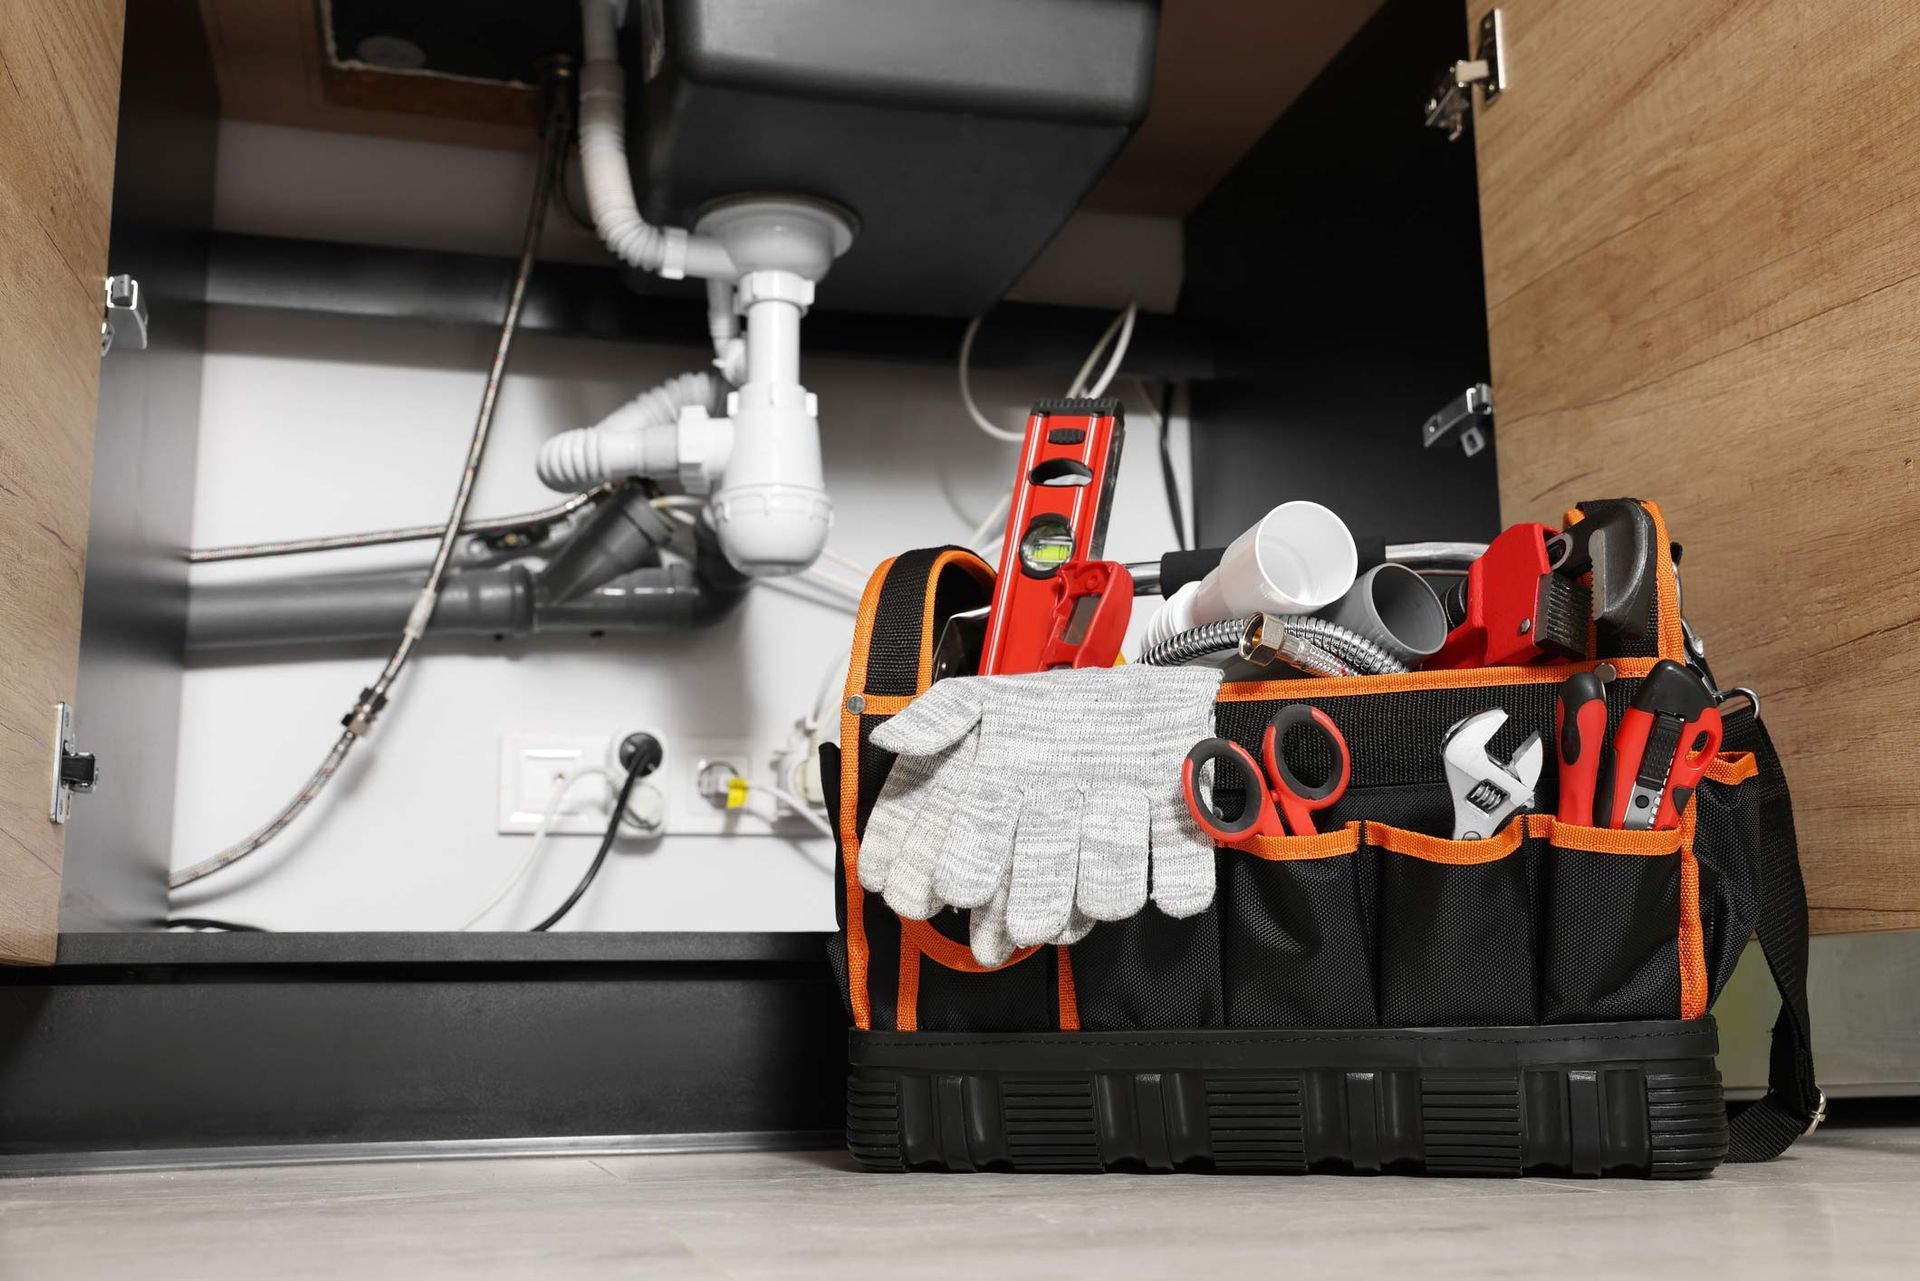 Tool bag on the floor under kitchen sink | Canley Vale, NSW | Hydracorp